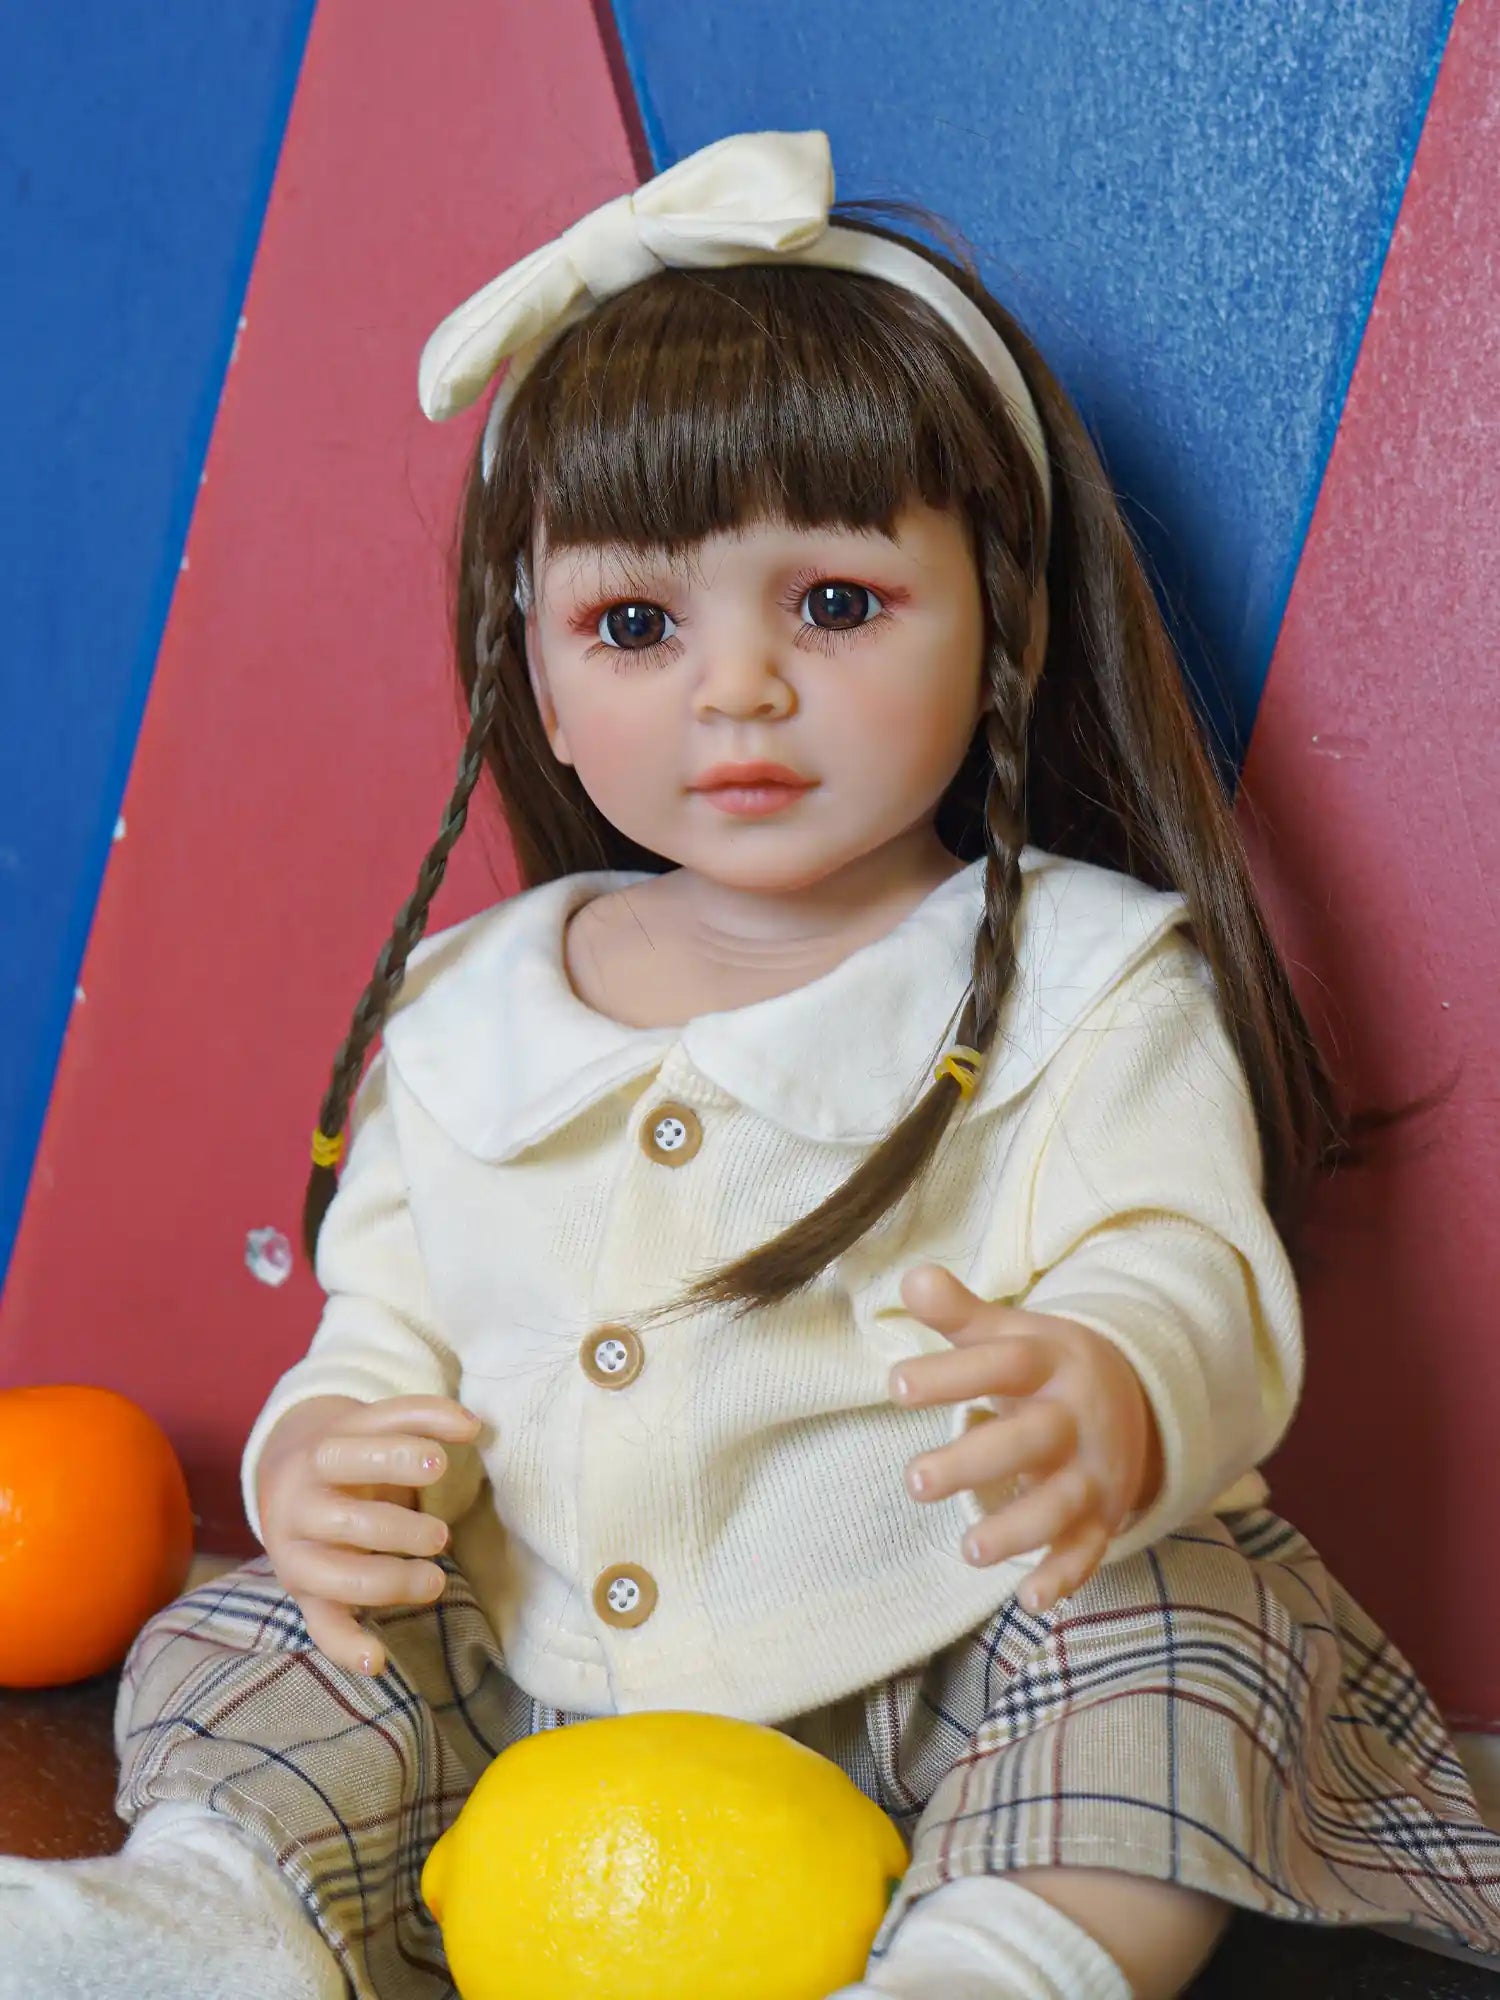 Doll in a poised sitting position, adorned with a white bow, embracing a classic schoolgirl charm.